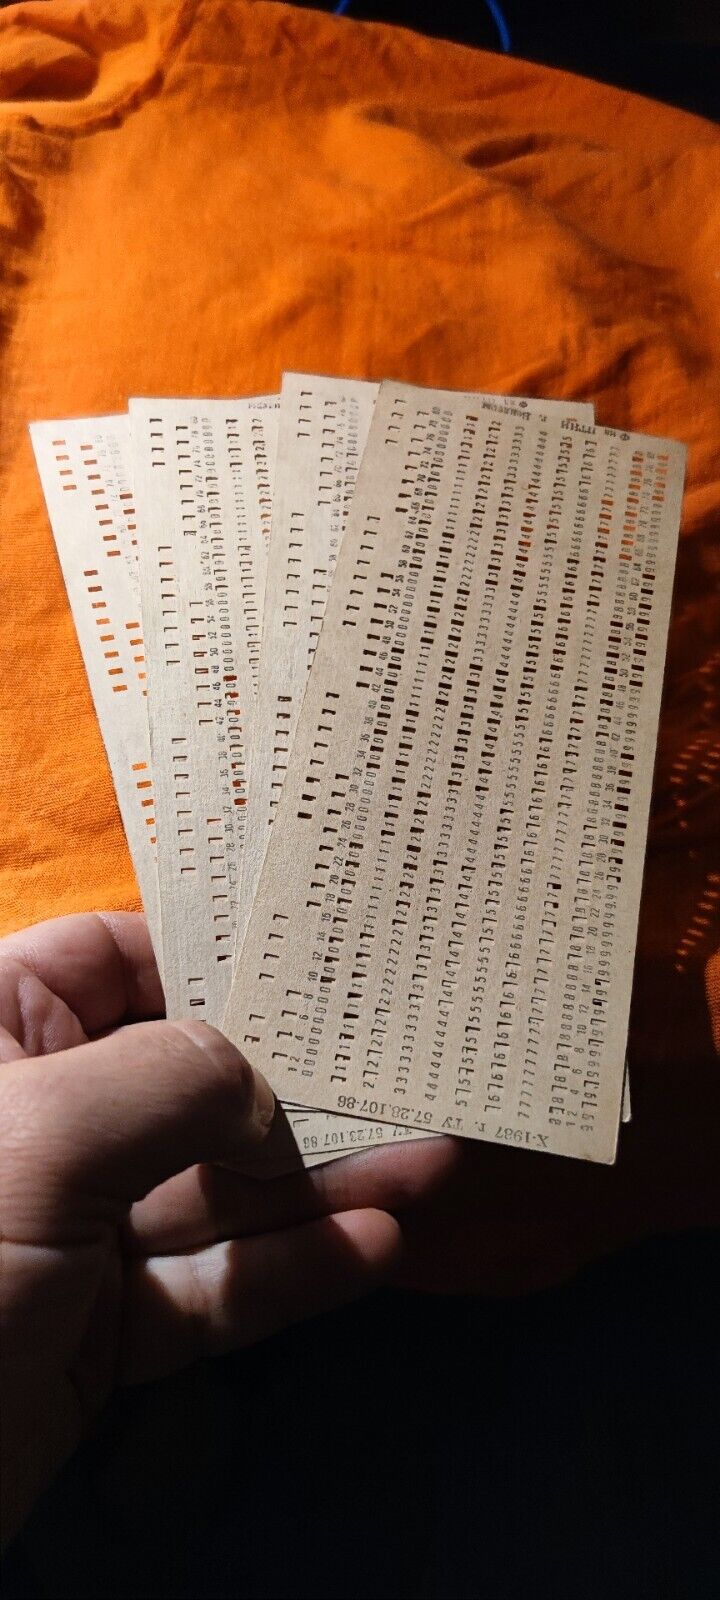 8x VINTAGE MAINFRAME COMPUTER Perforated PUNCH CARDS  IBM 80- column card format